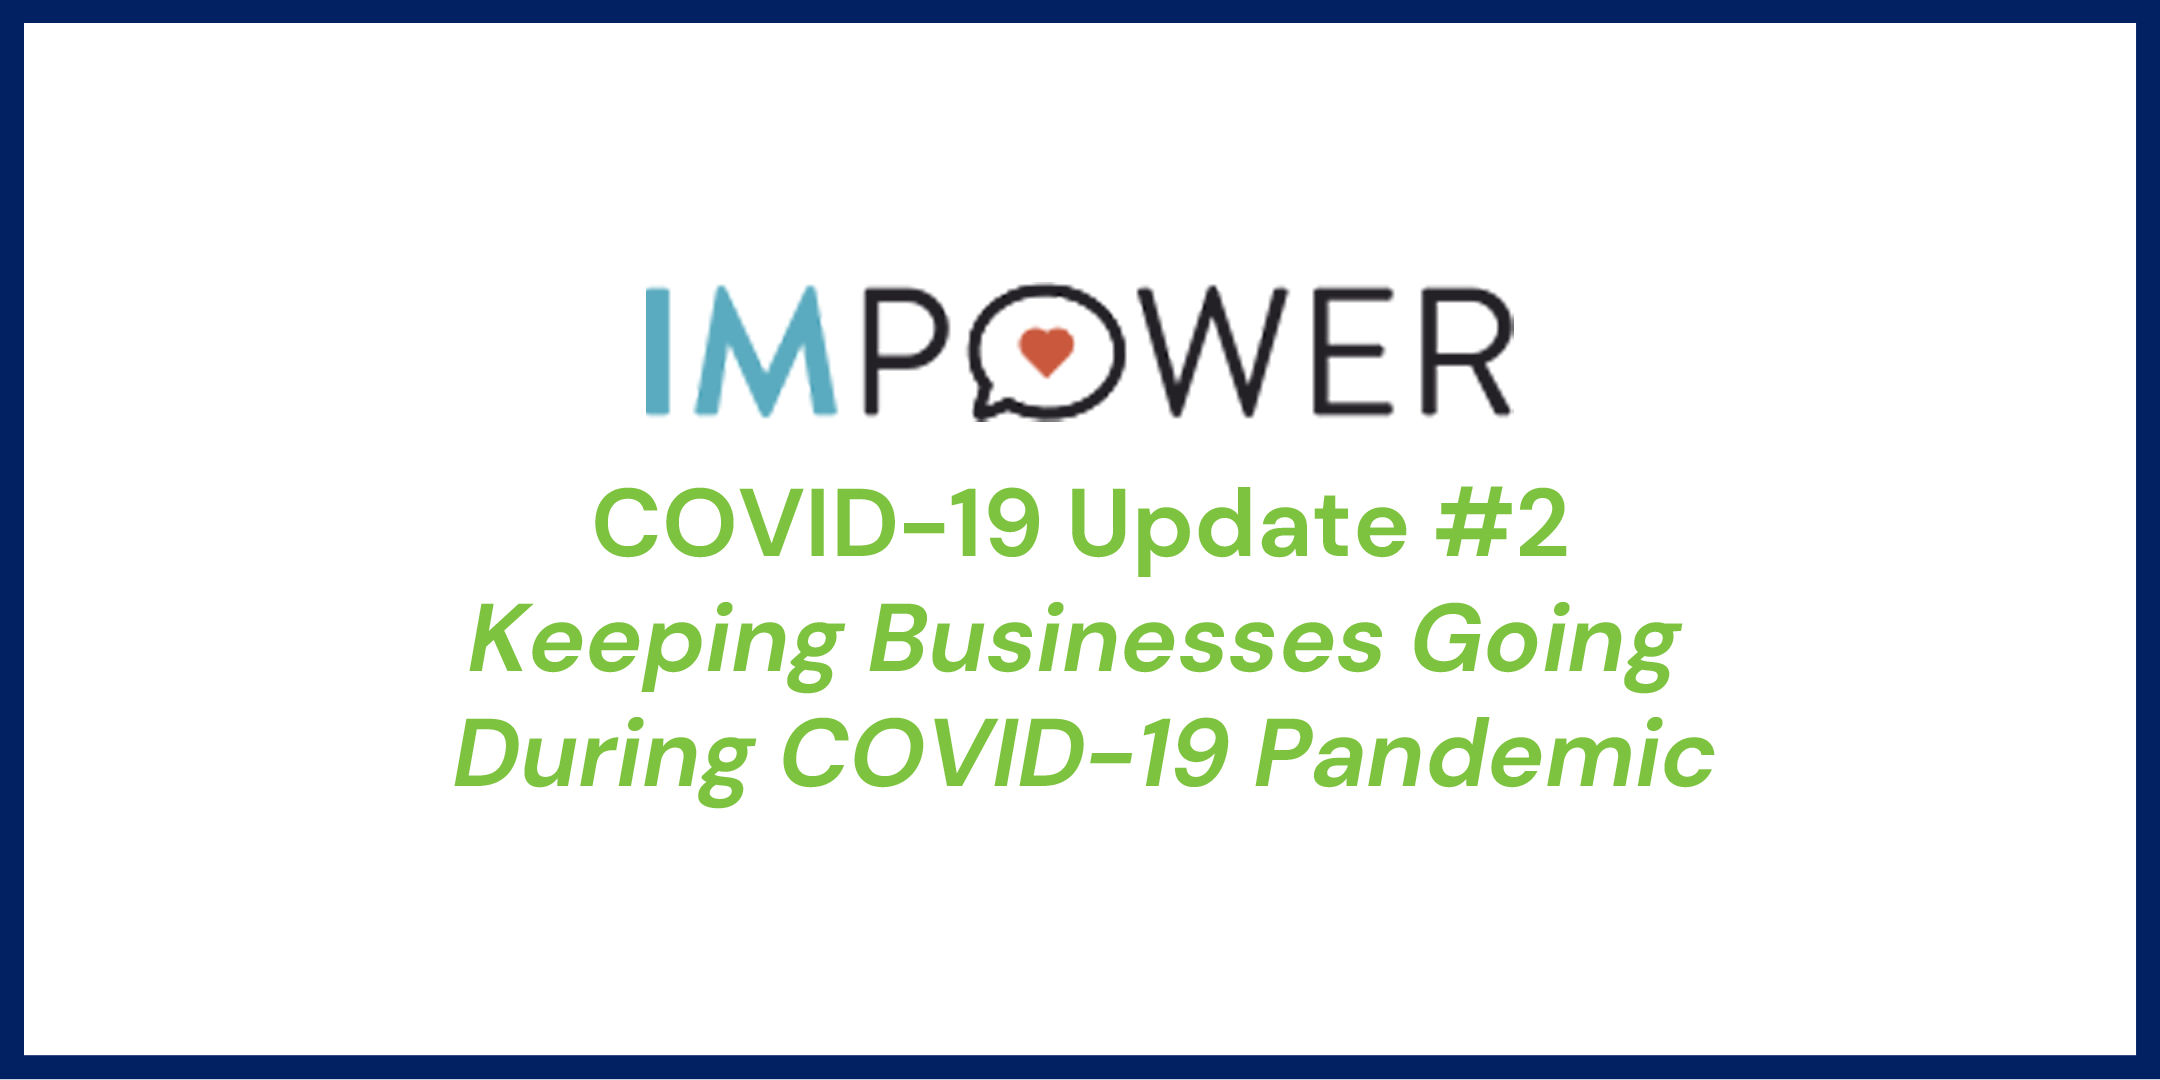 IMpower - Keeping Businesses Going During COVID-19